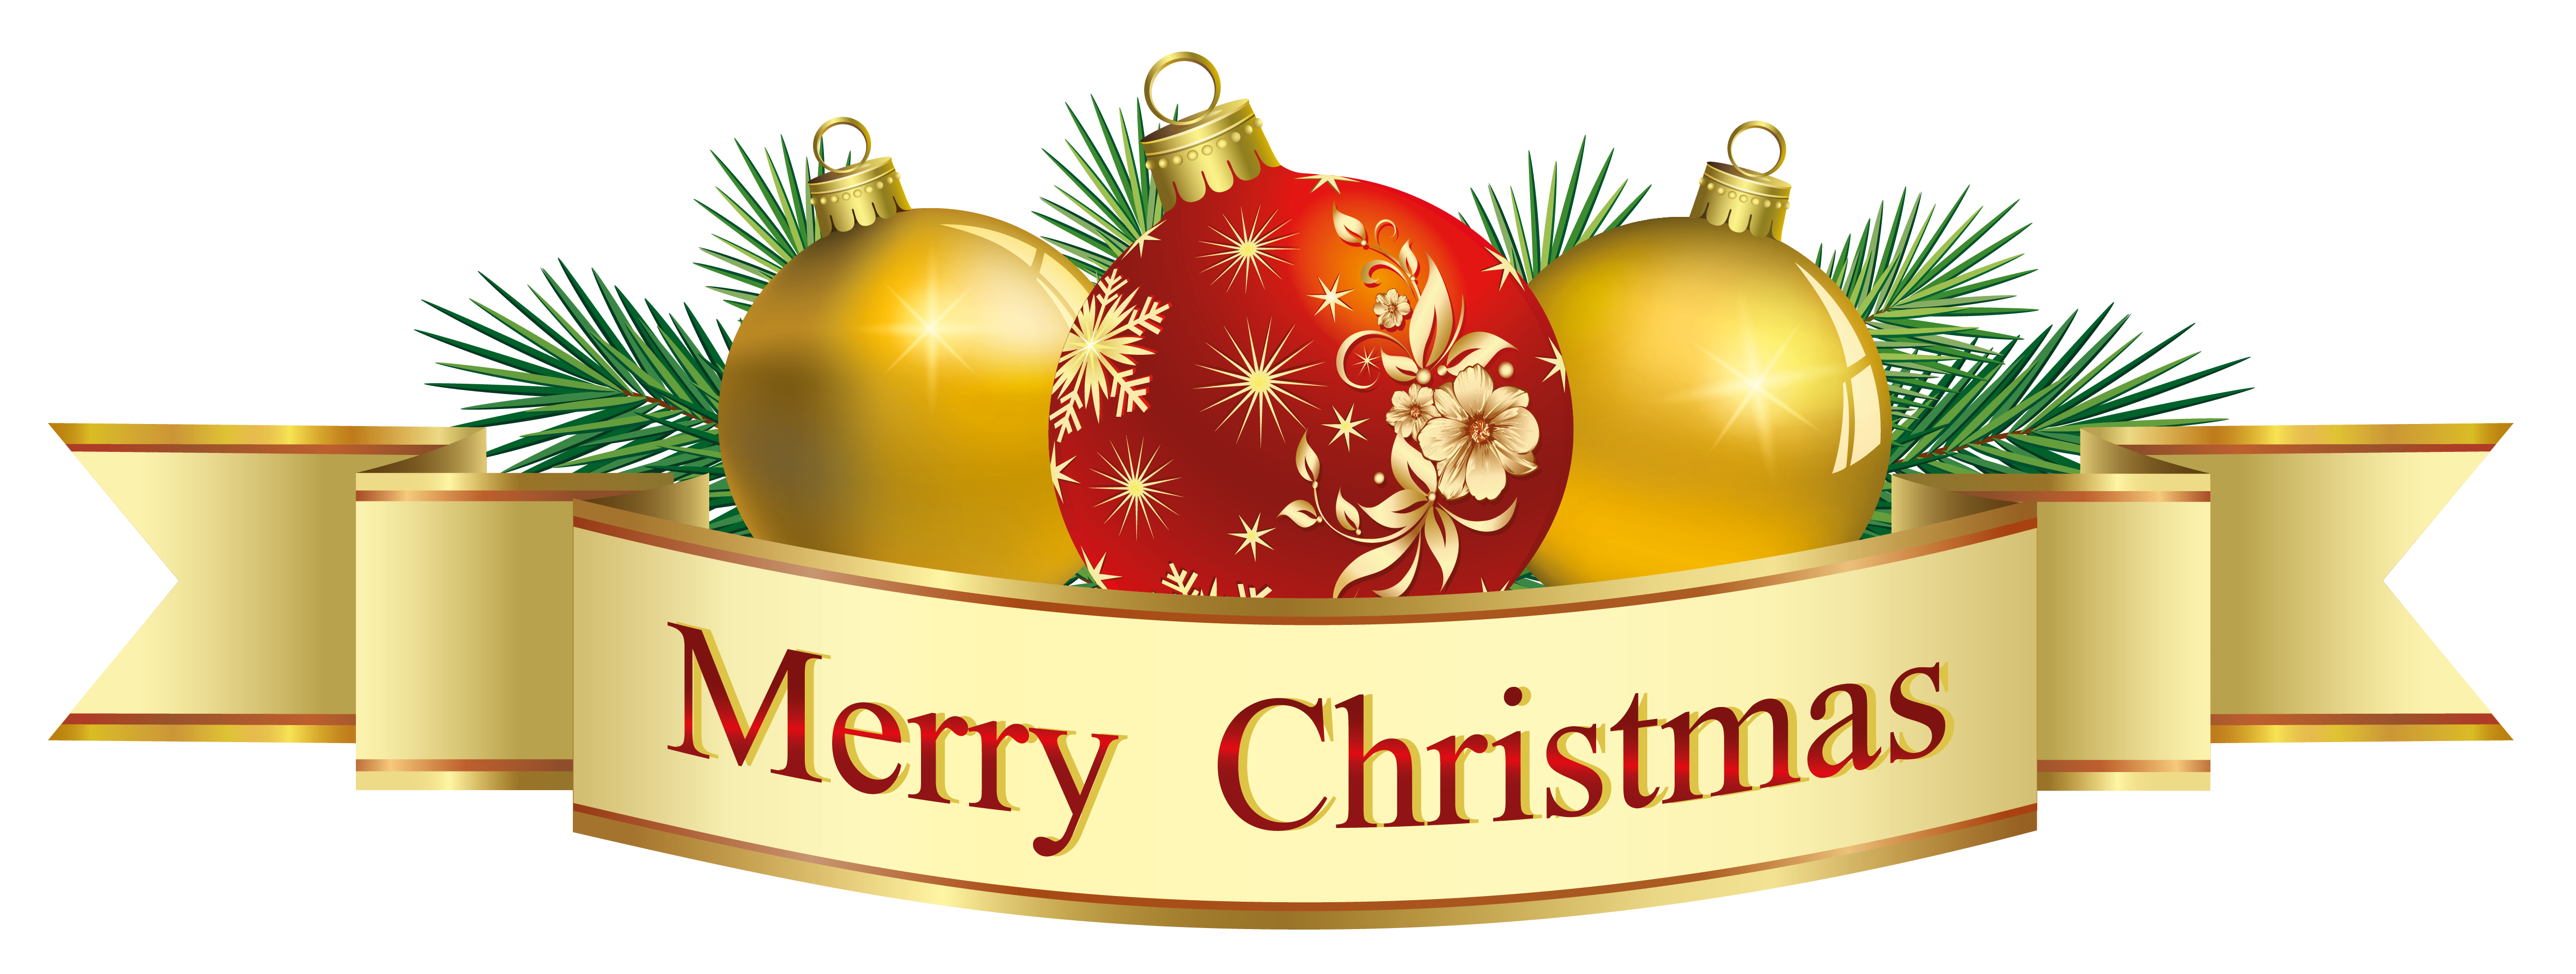 Merry christmas images clip art merry and new year image - Clipartix